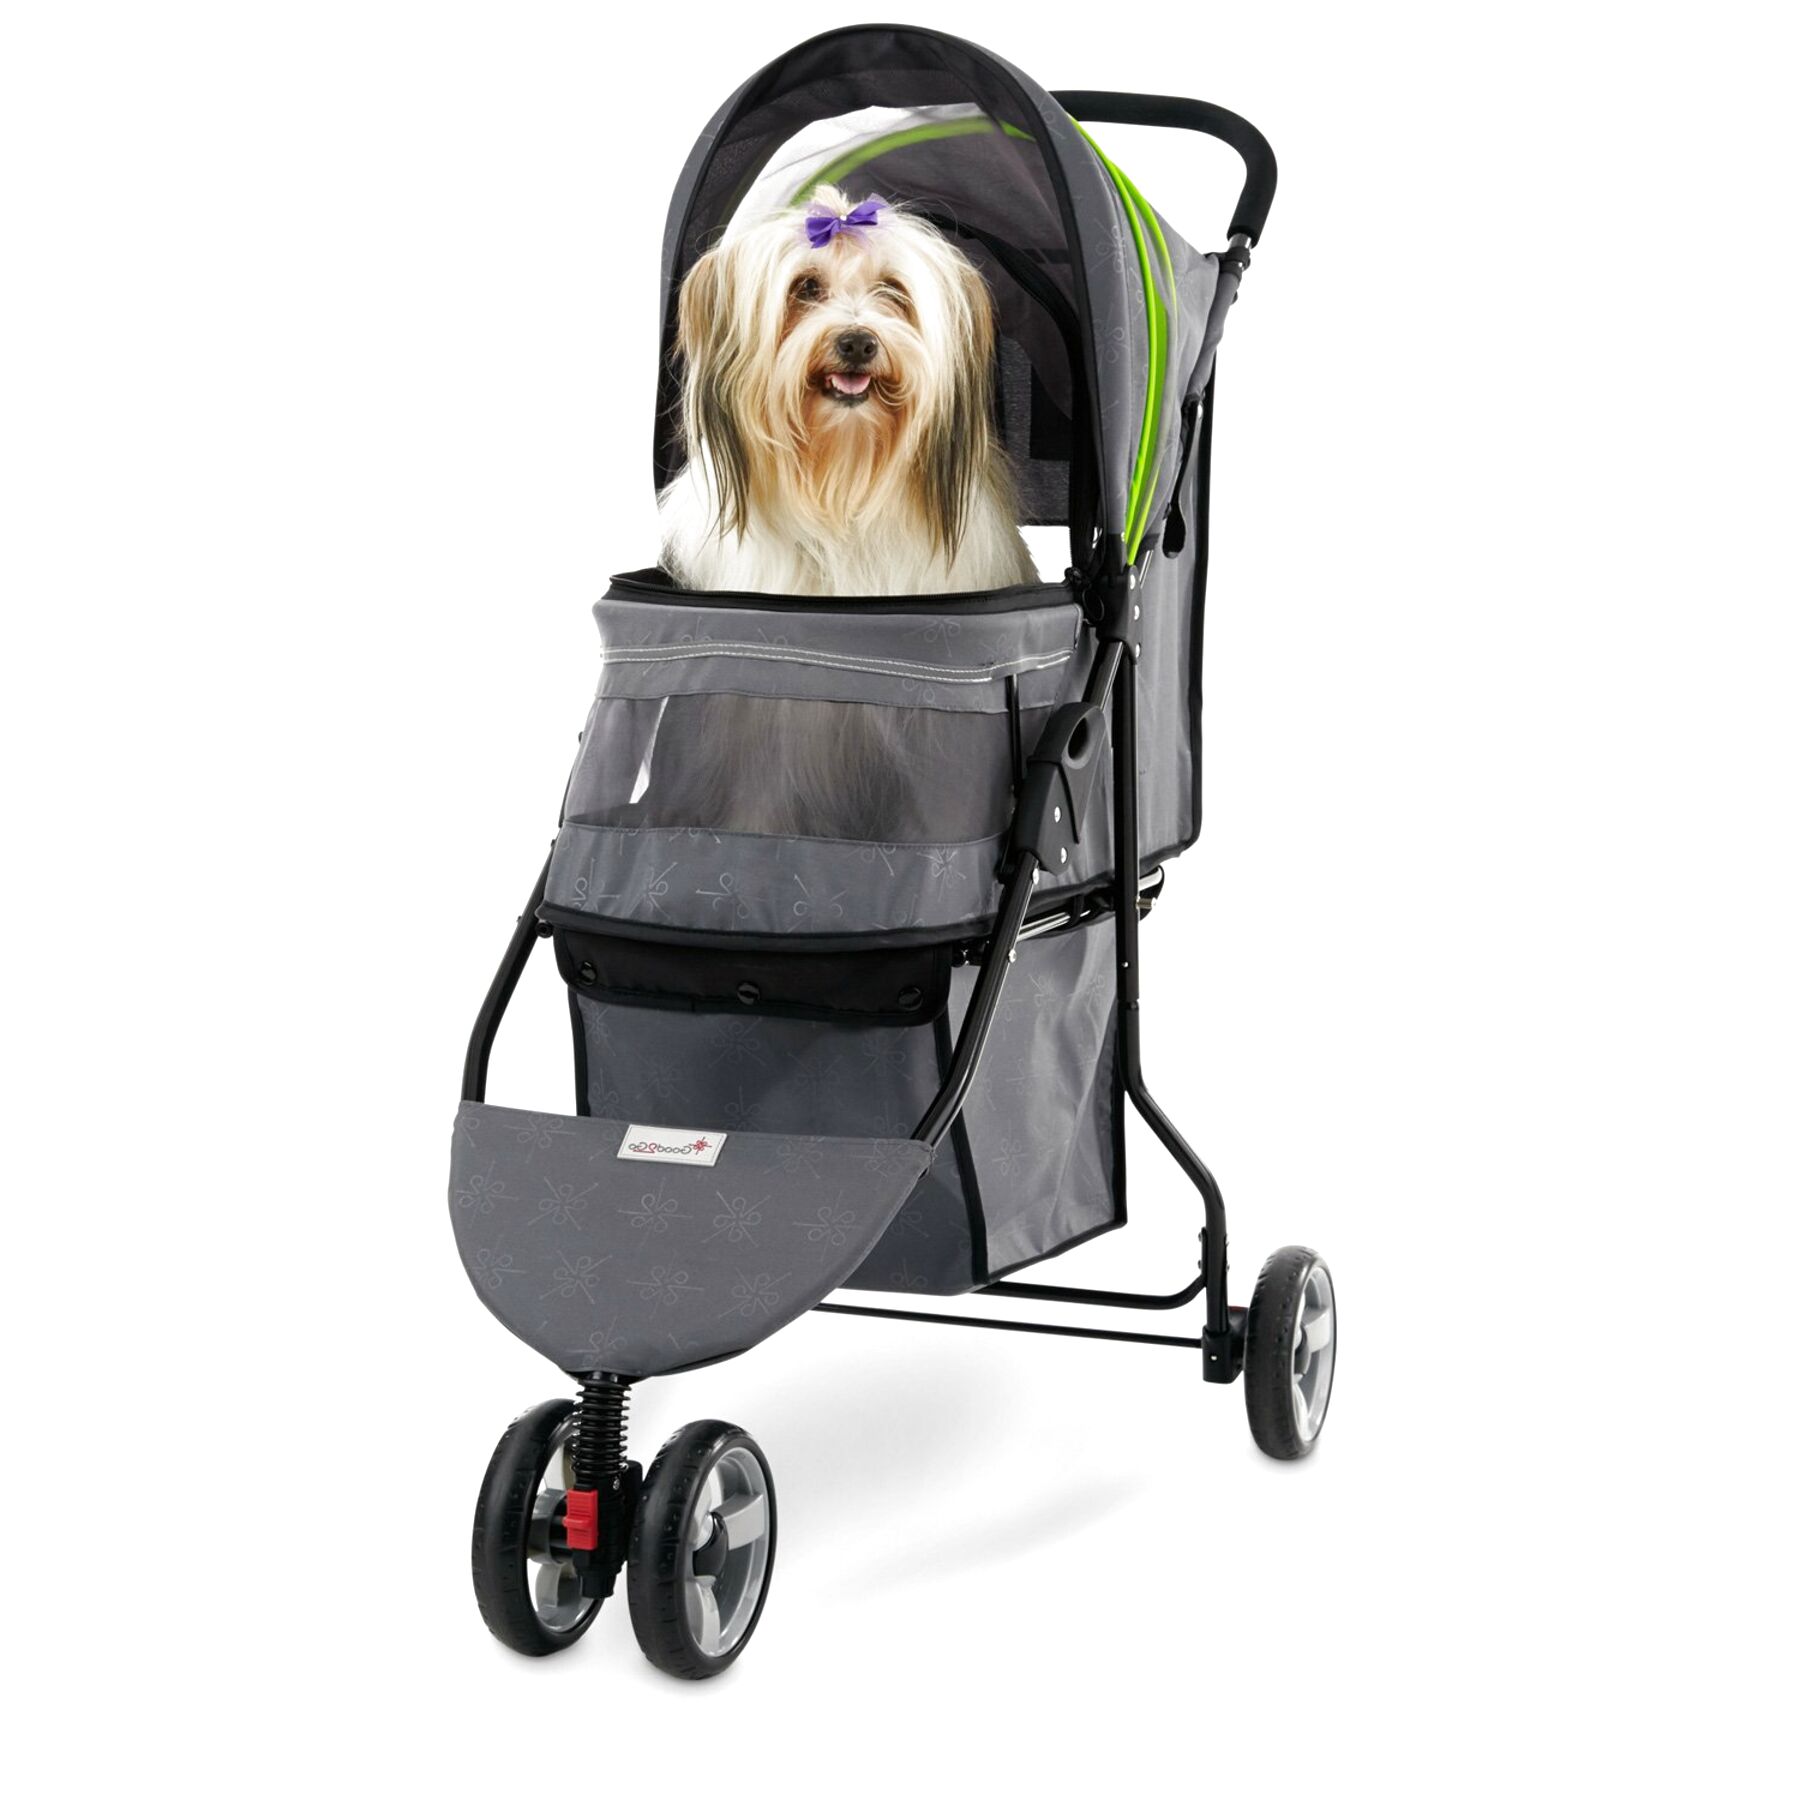 second hand dog pushchairs